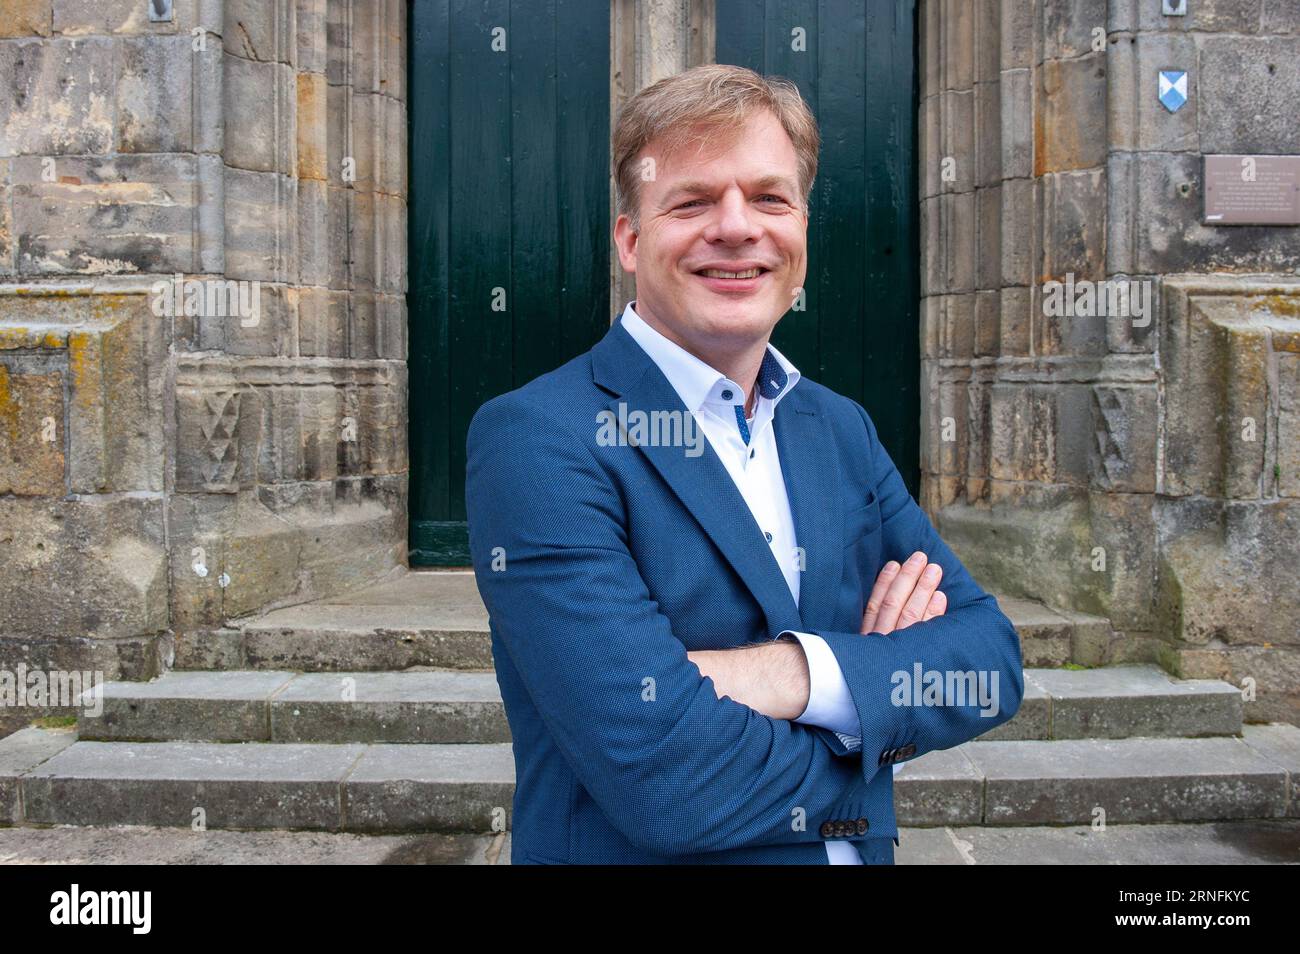 ENSCHEDE, THE NETHERLANDS - JUL 05, 2020: Dutch politician Pieter Omtzigt is the most popular politician in the House of Representatives. Stock Photo